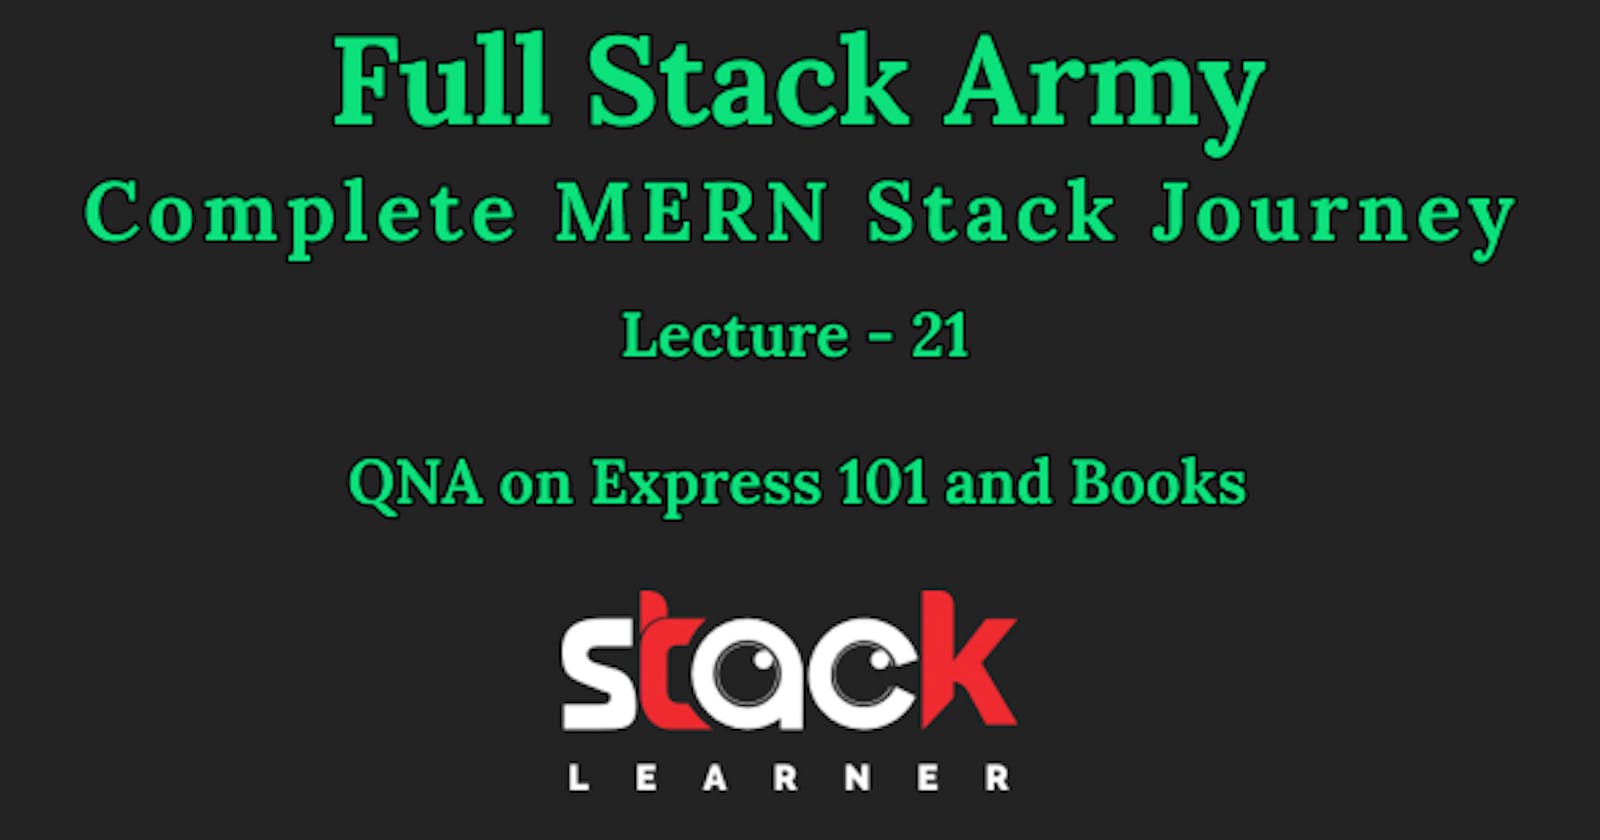 Lecture 21 - QNA on Express 101 and Books